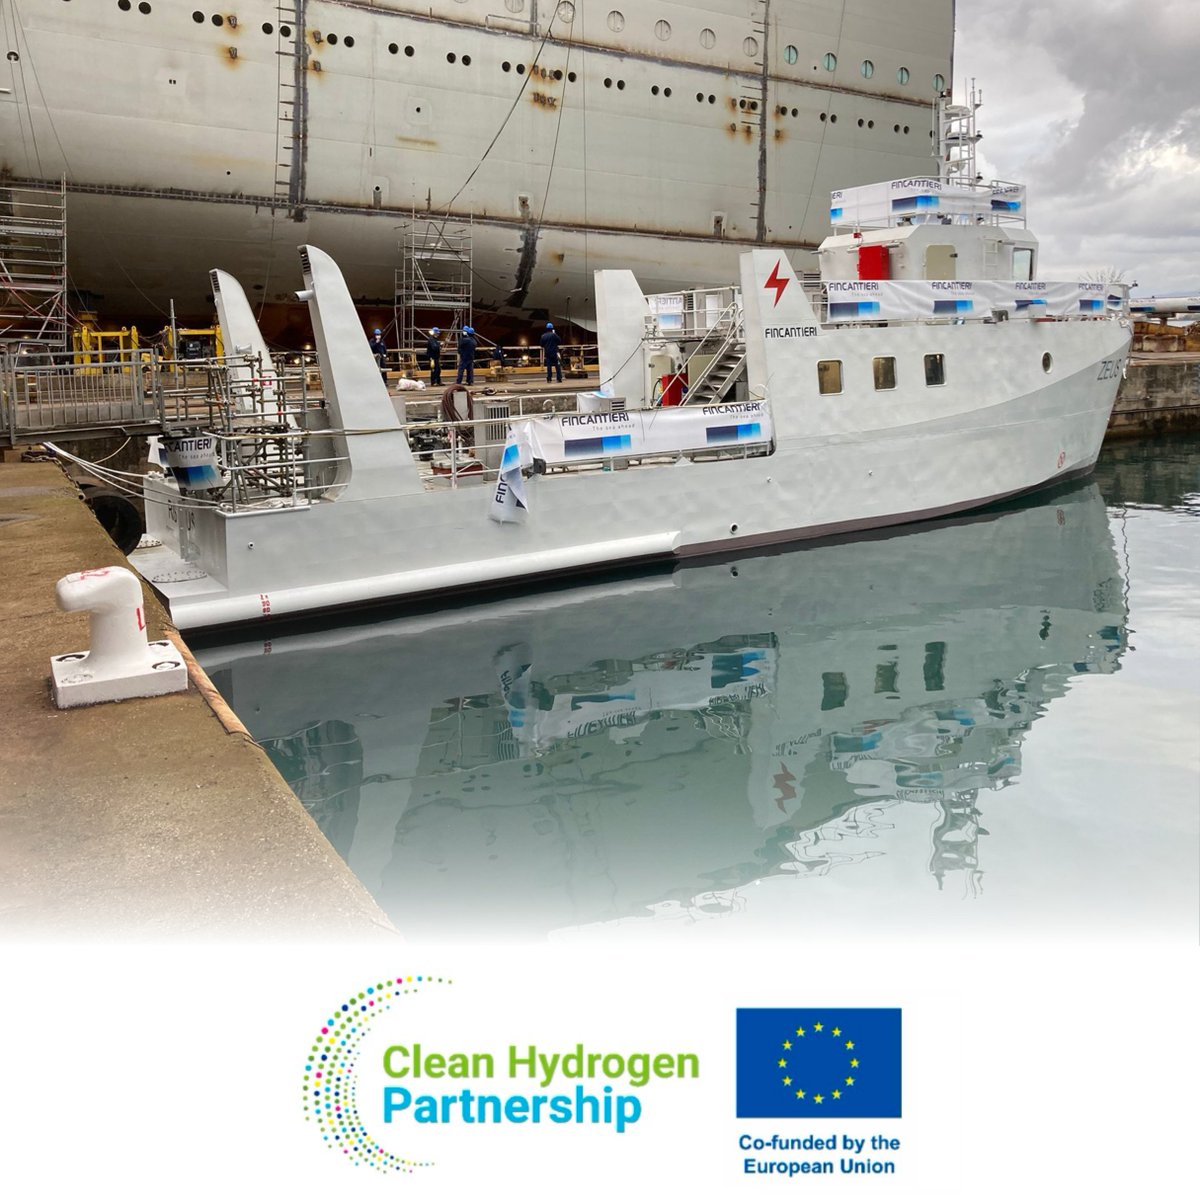 #ProtonMotor and about 50 other signatories have signed a joint letter to EU legislators for an ambitious #FuelEUMaritime Regulation. The signatories call on the co-legislators to seize this opportunity to make the European industry a global leader in #greenshipping. 💚⛴